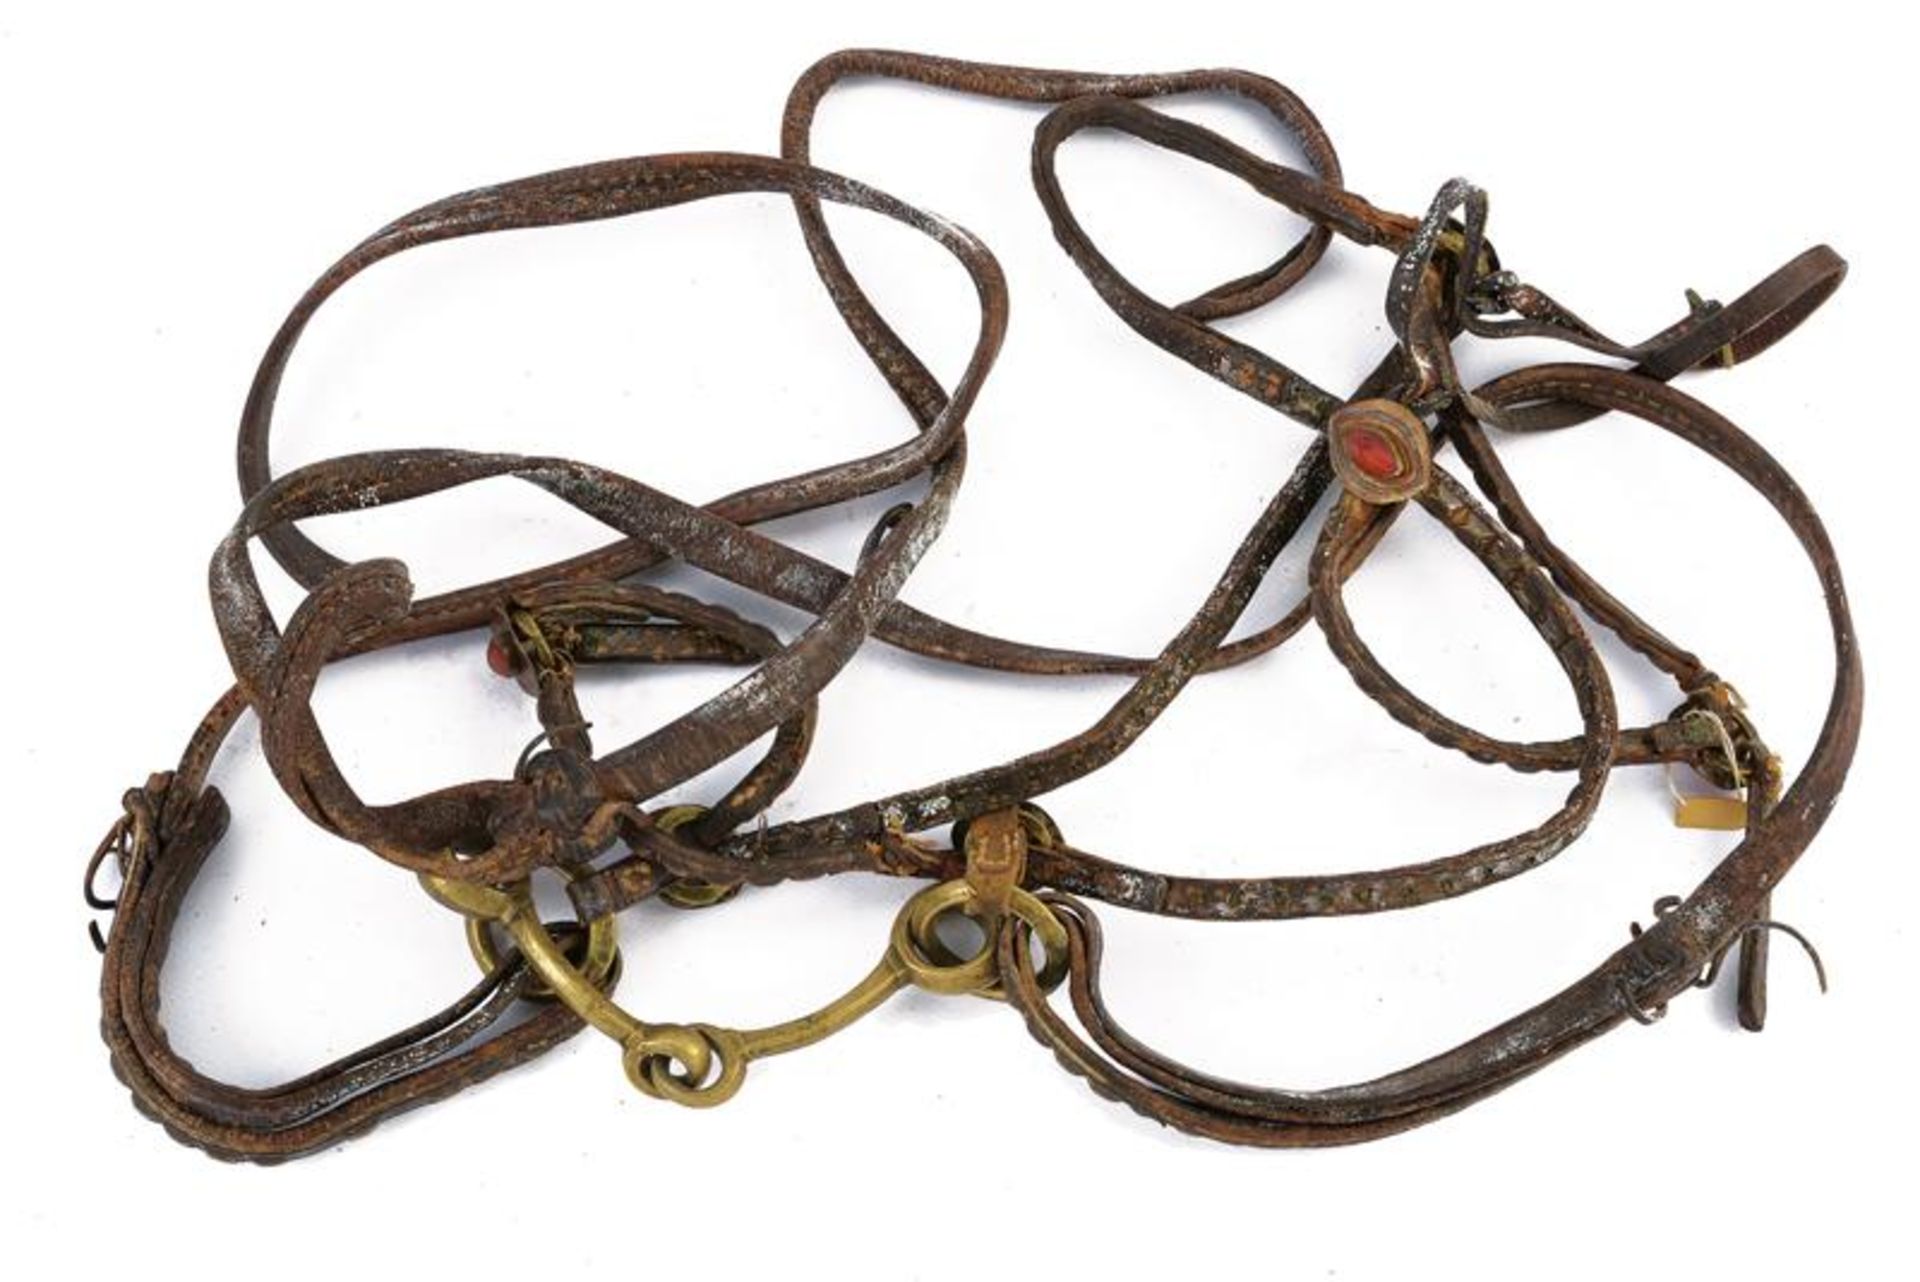 A snaffle bit with bridle